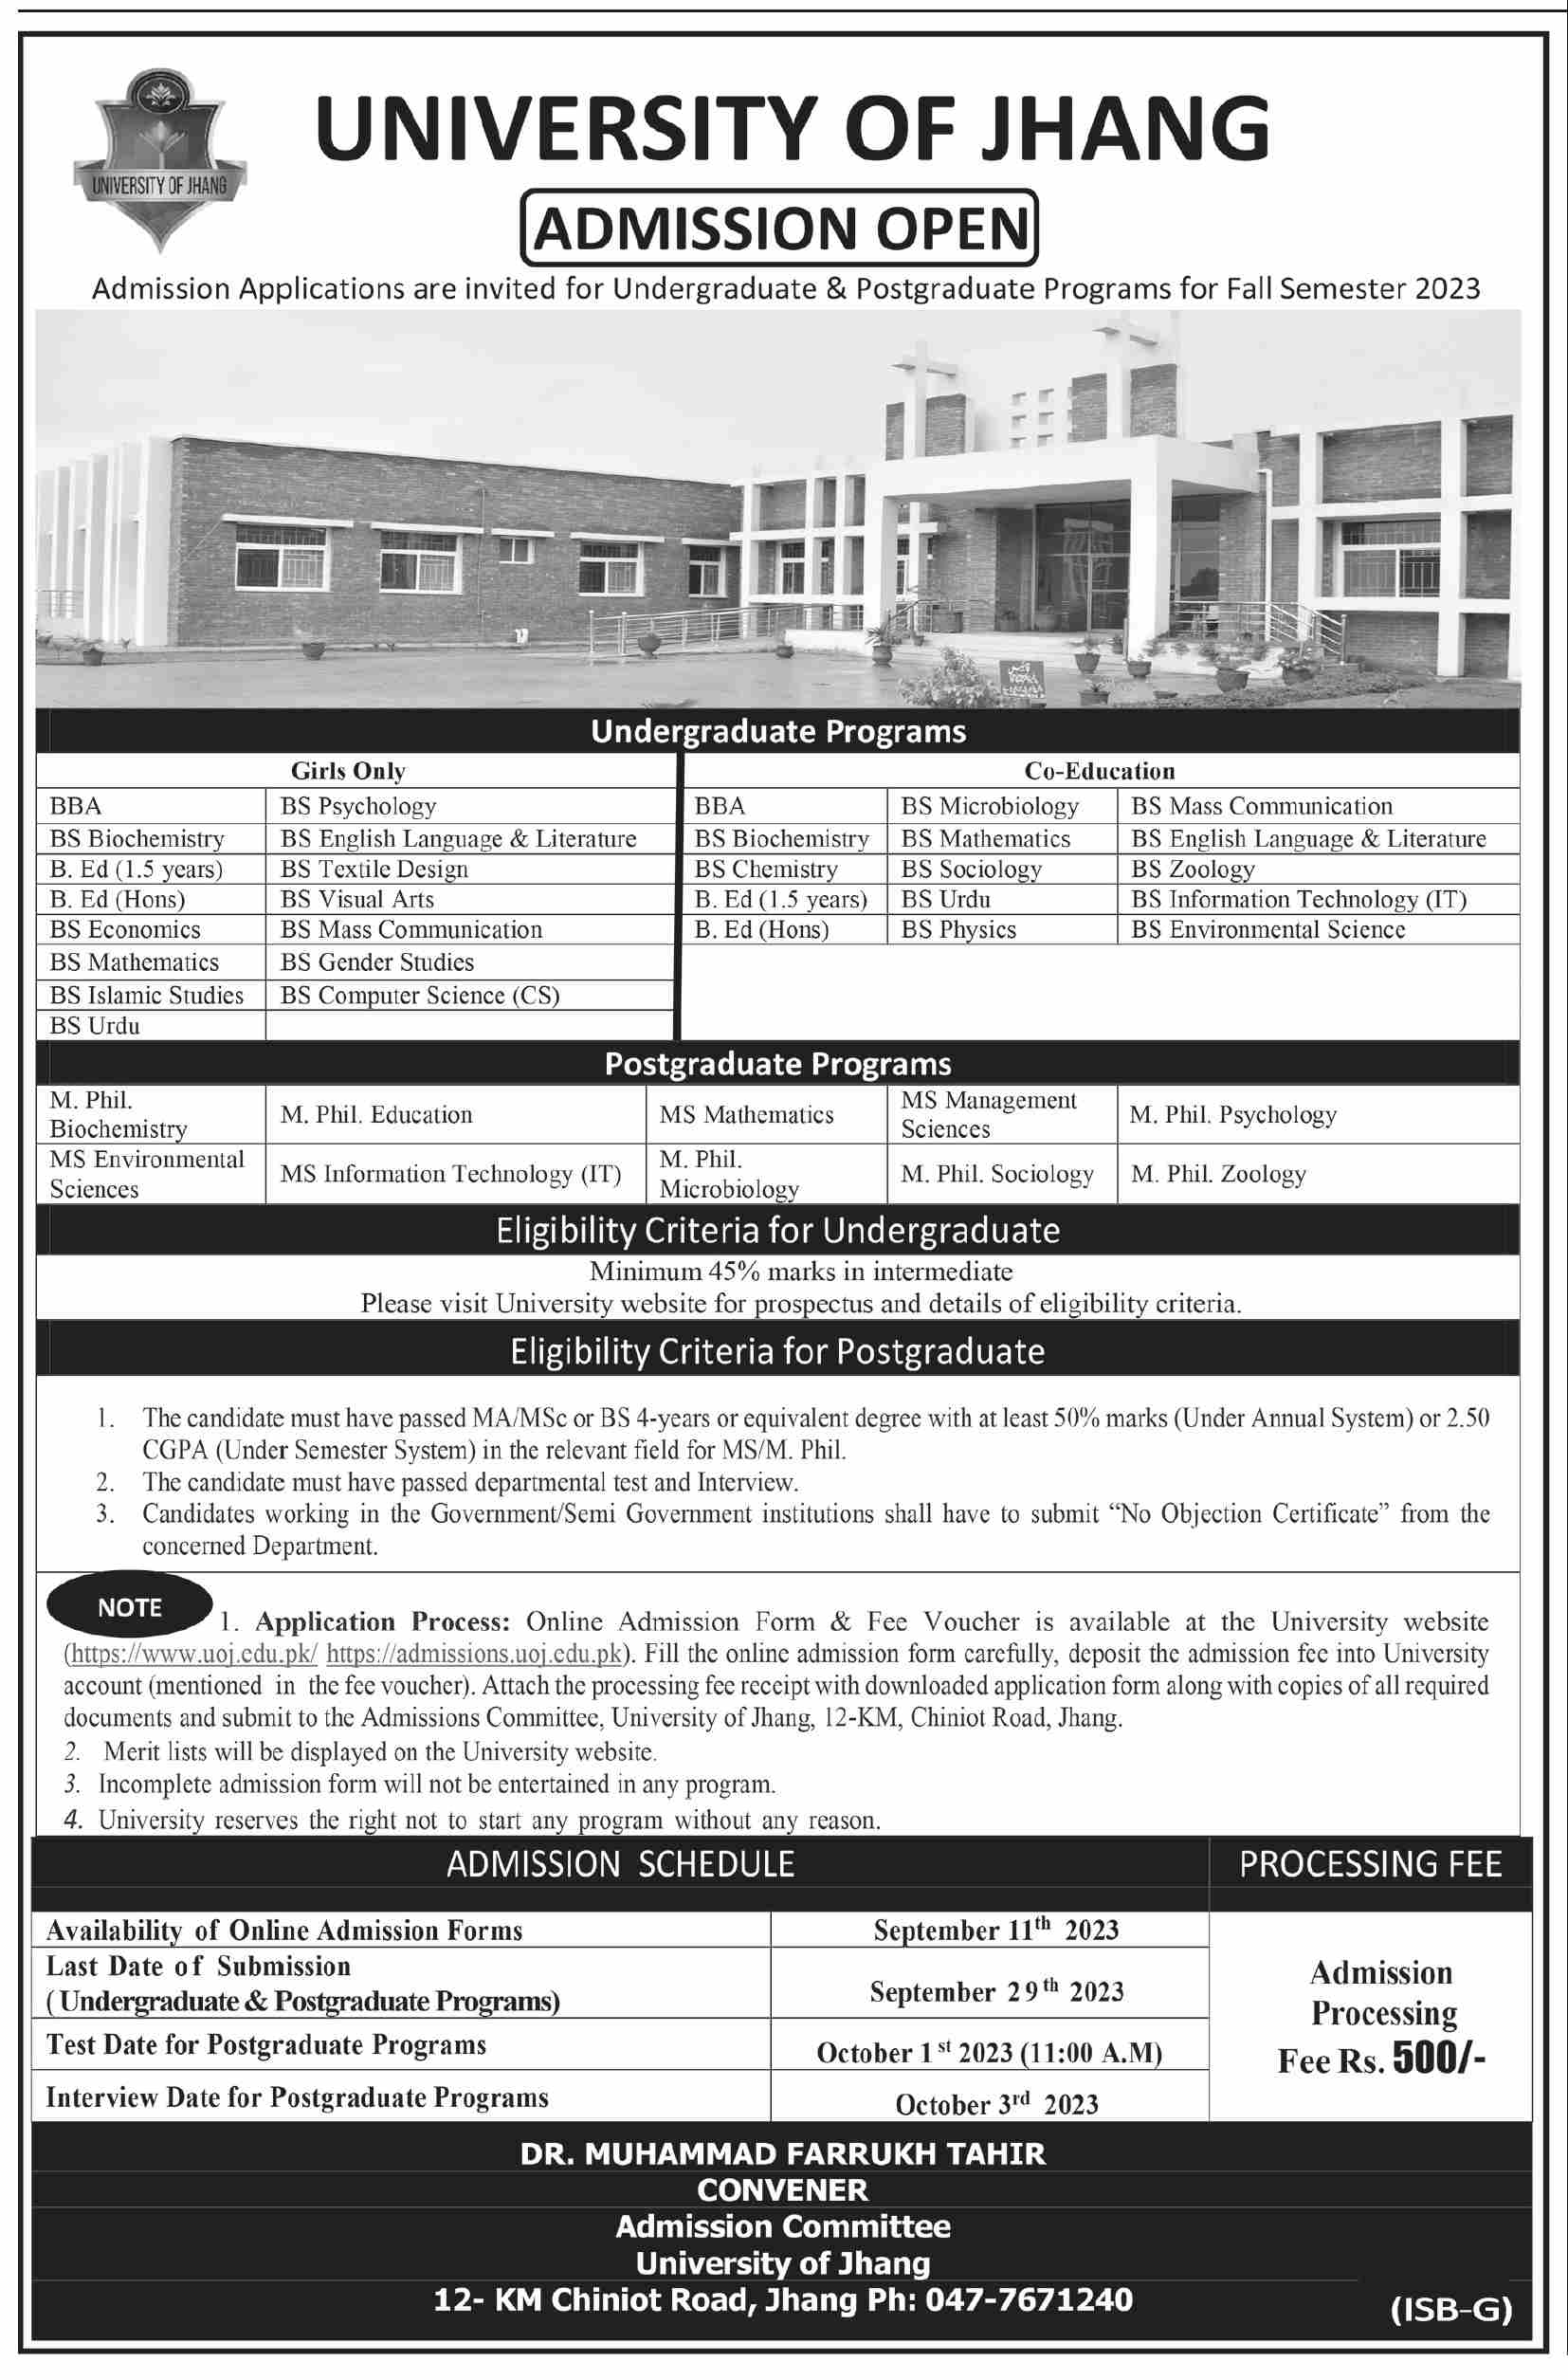 University of Jhang Admission 2023